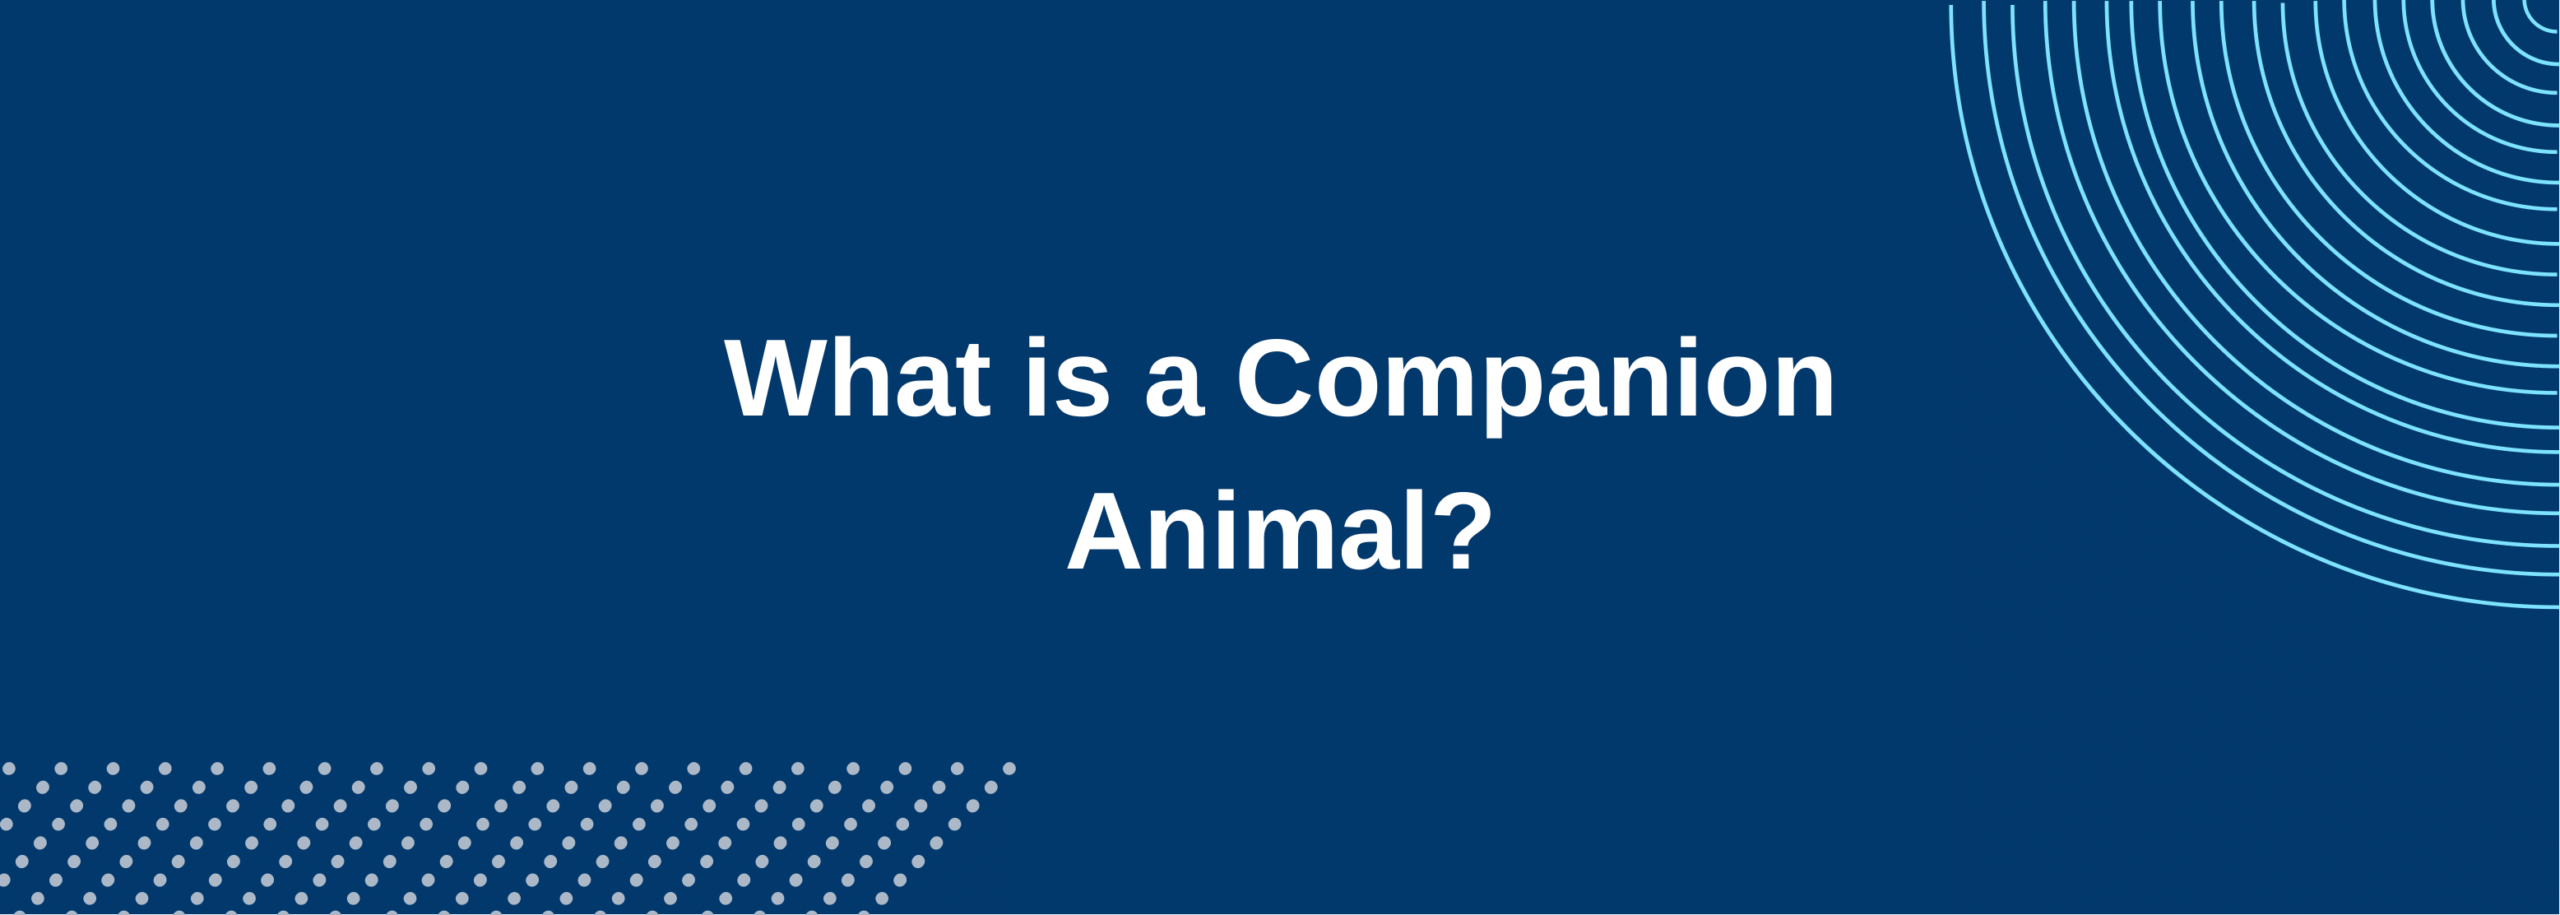 A companion animal is a domestic creature that provides companionship to a human. Companion animals are indistinguishable from pets.